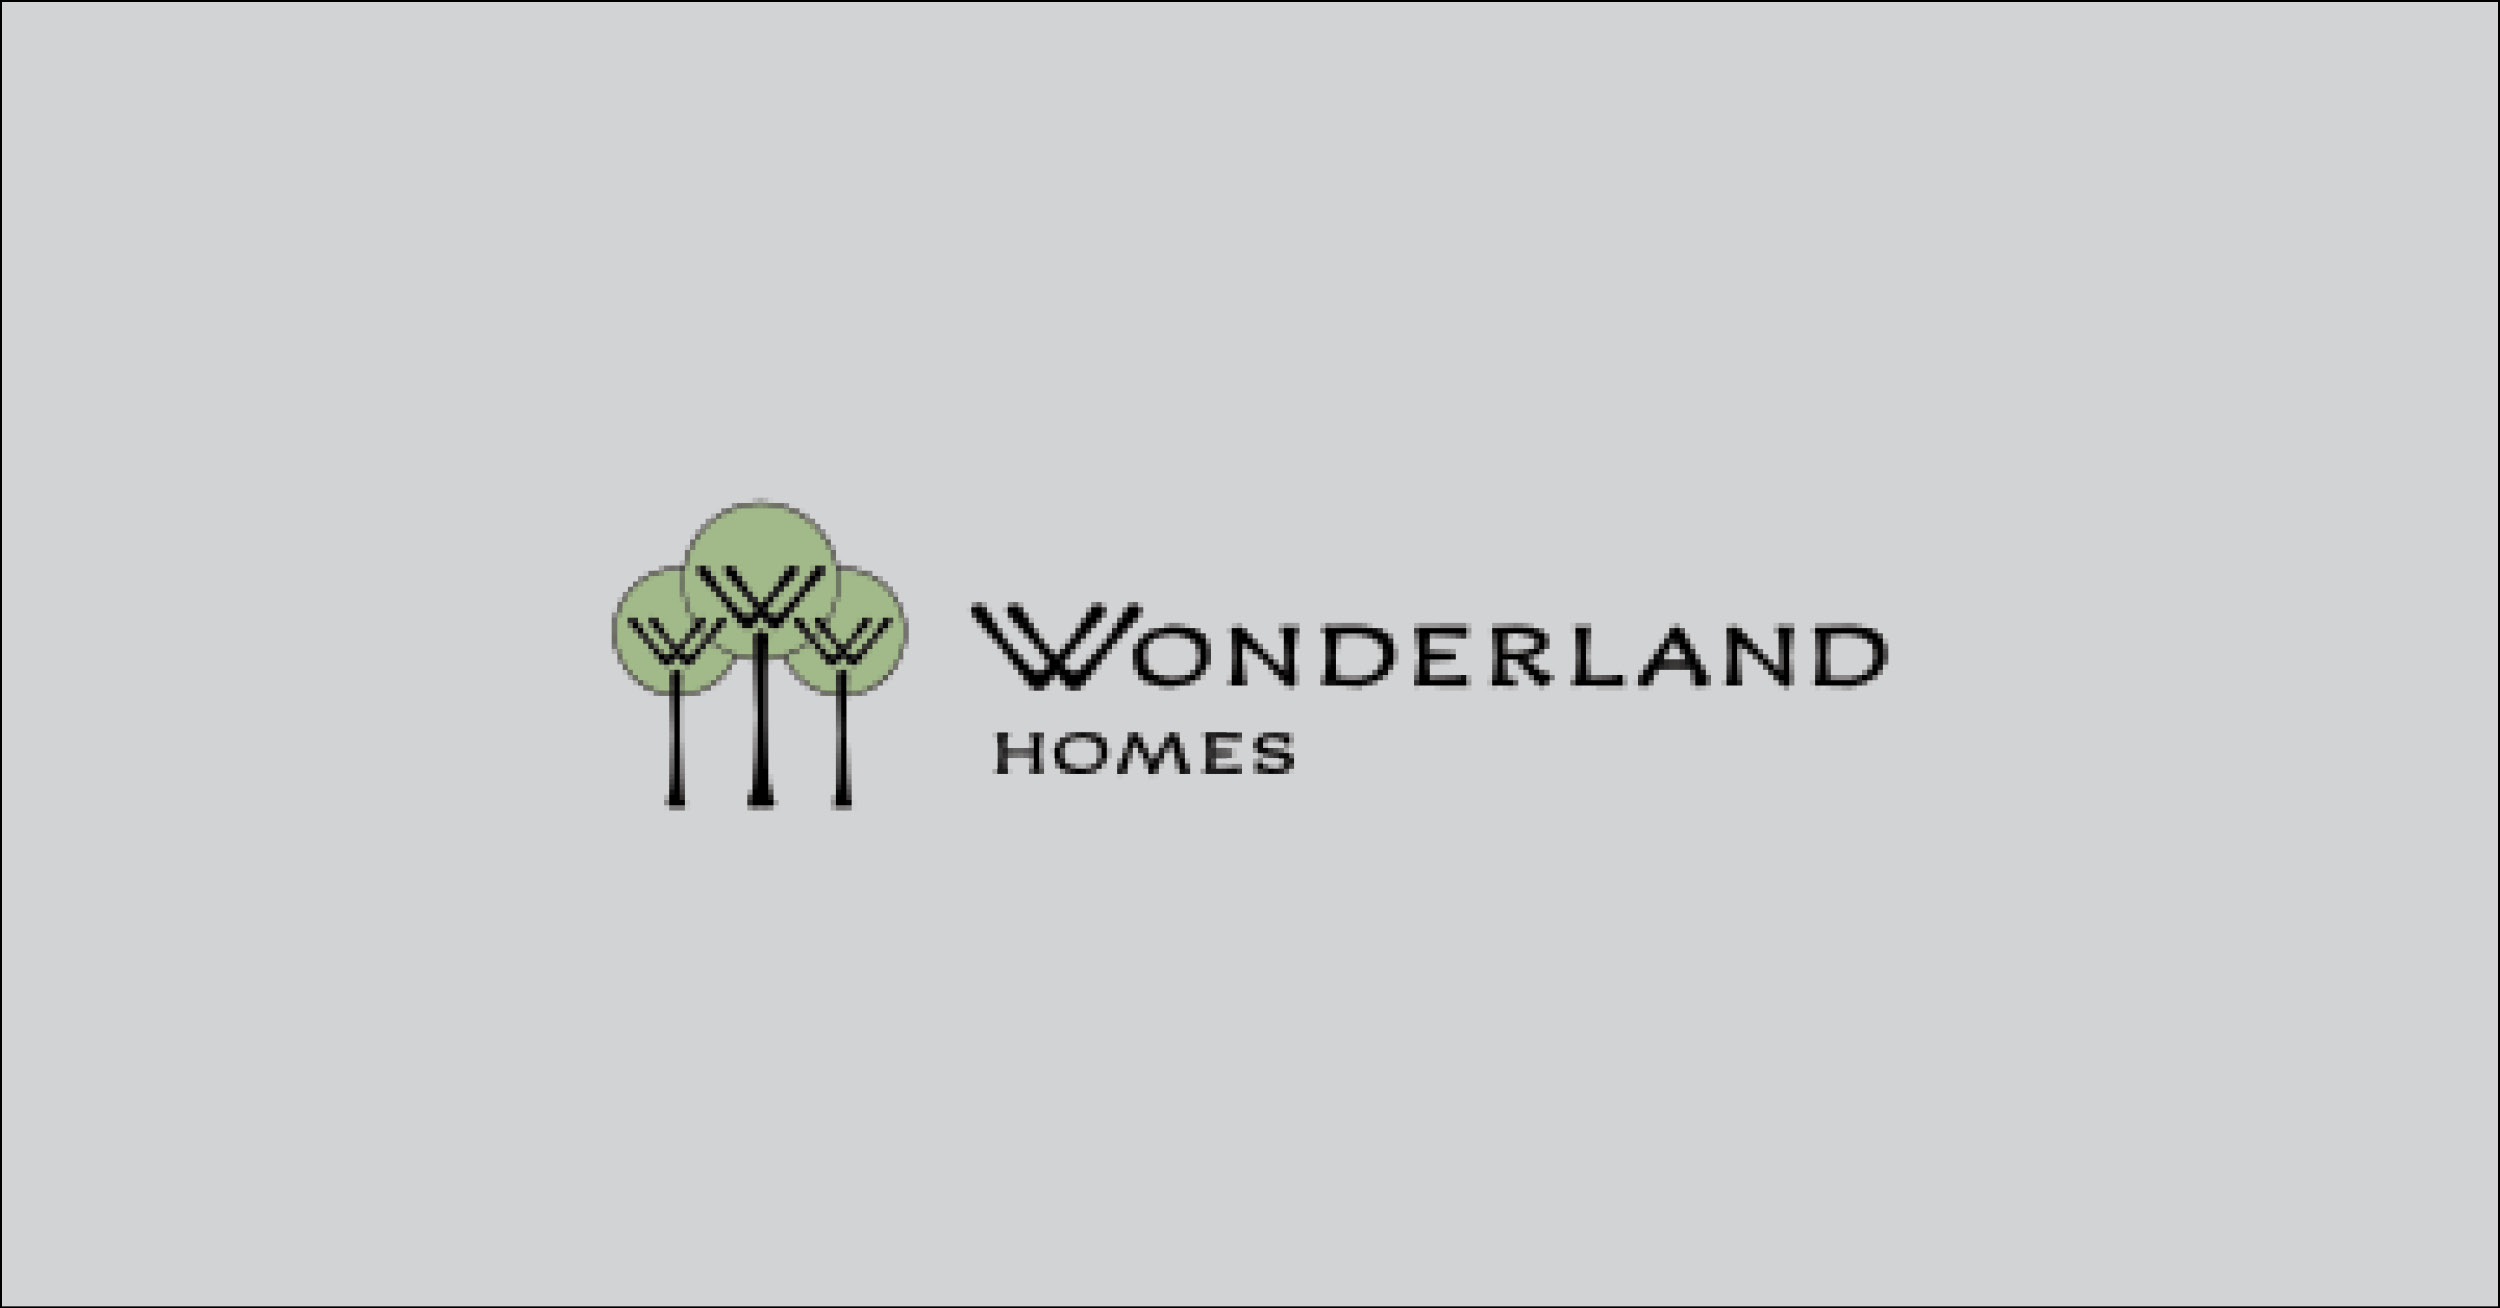 Find new construction or search for new homes and communities by Wonderland Homes in Colorado